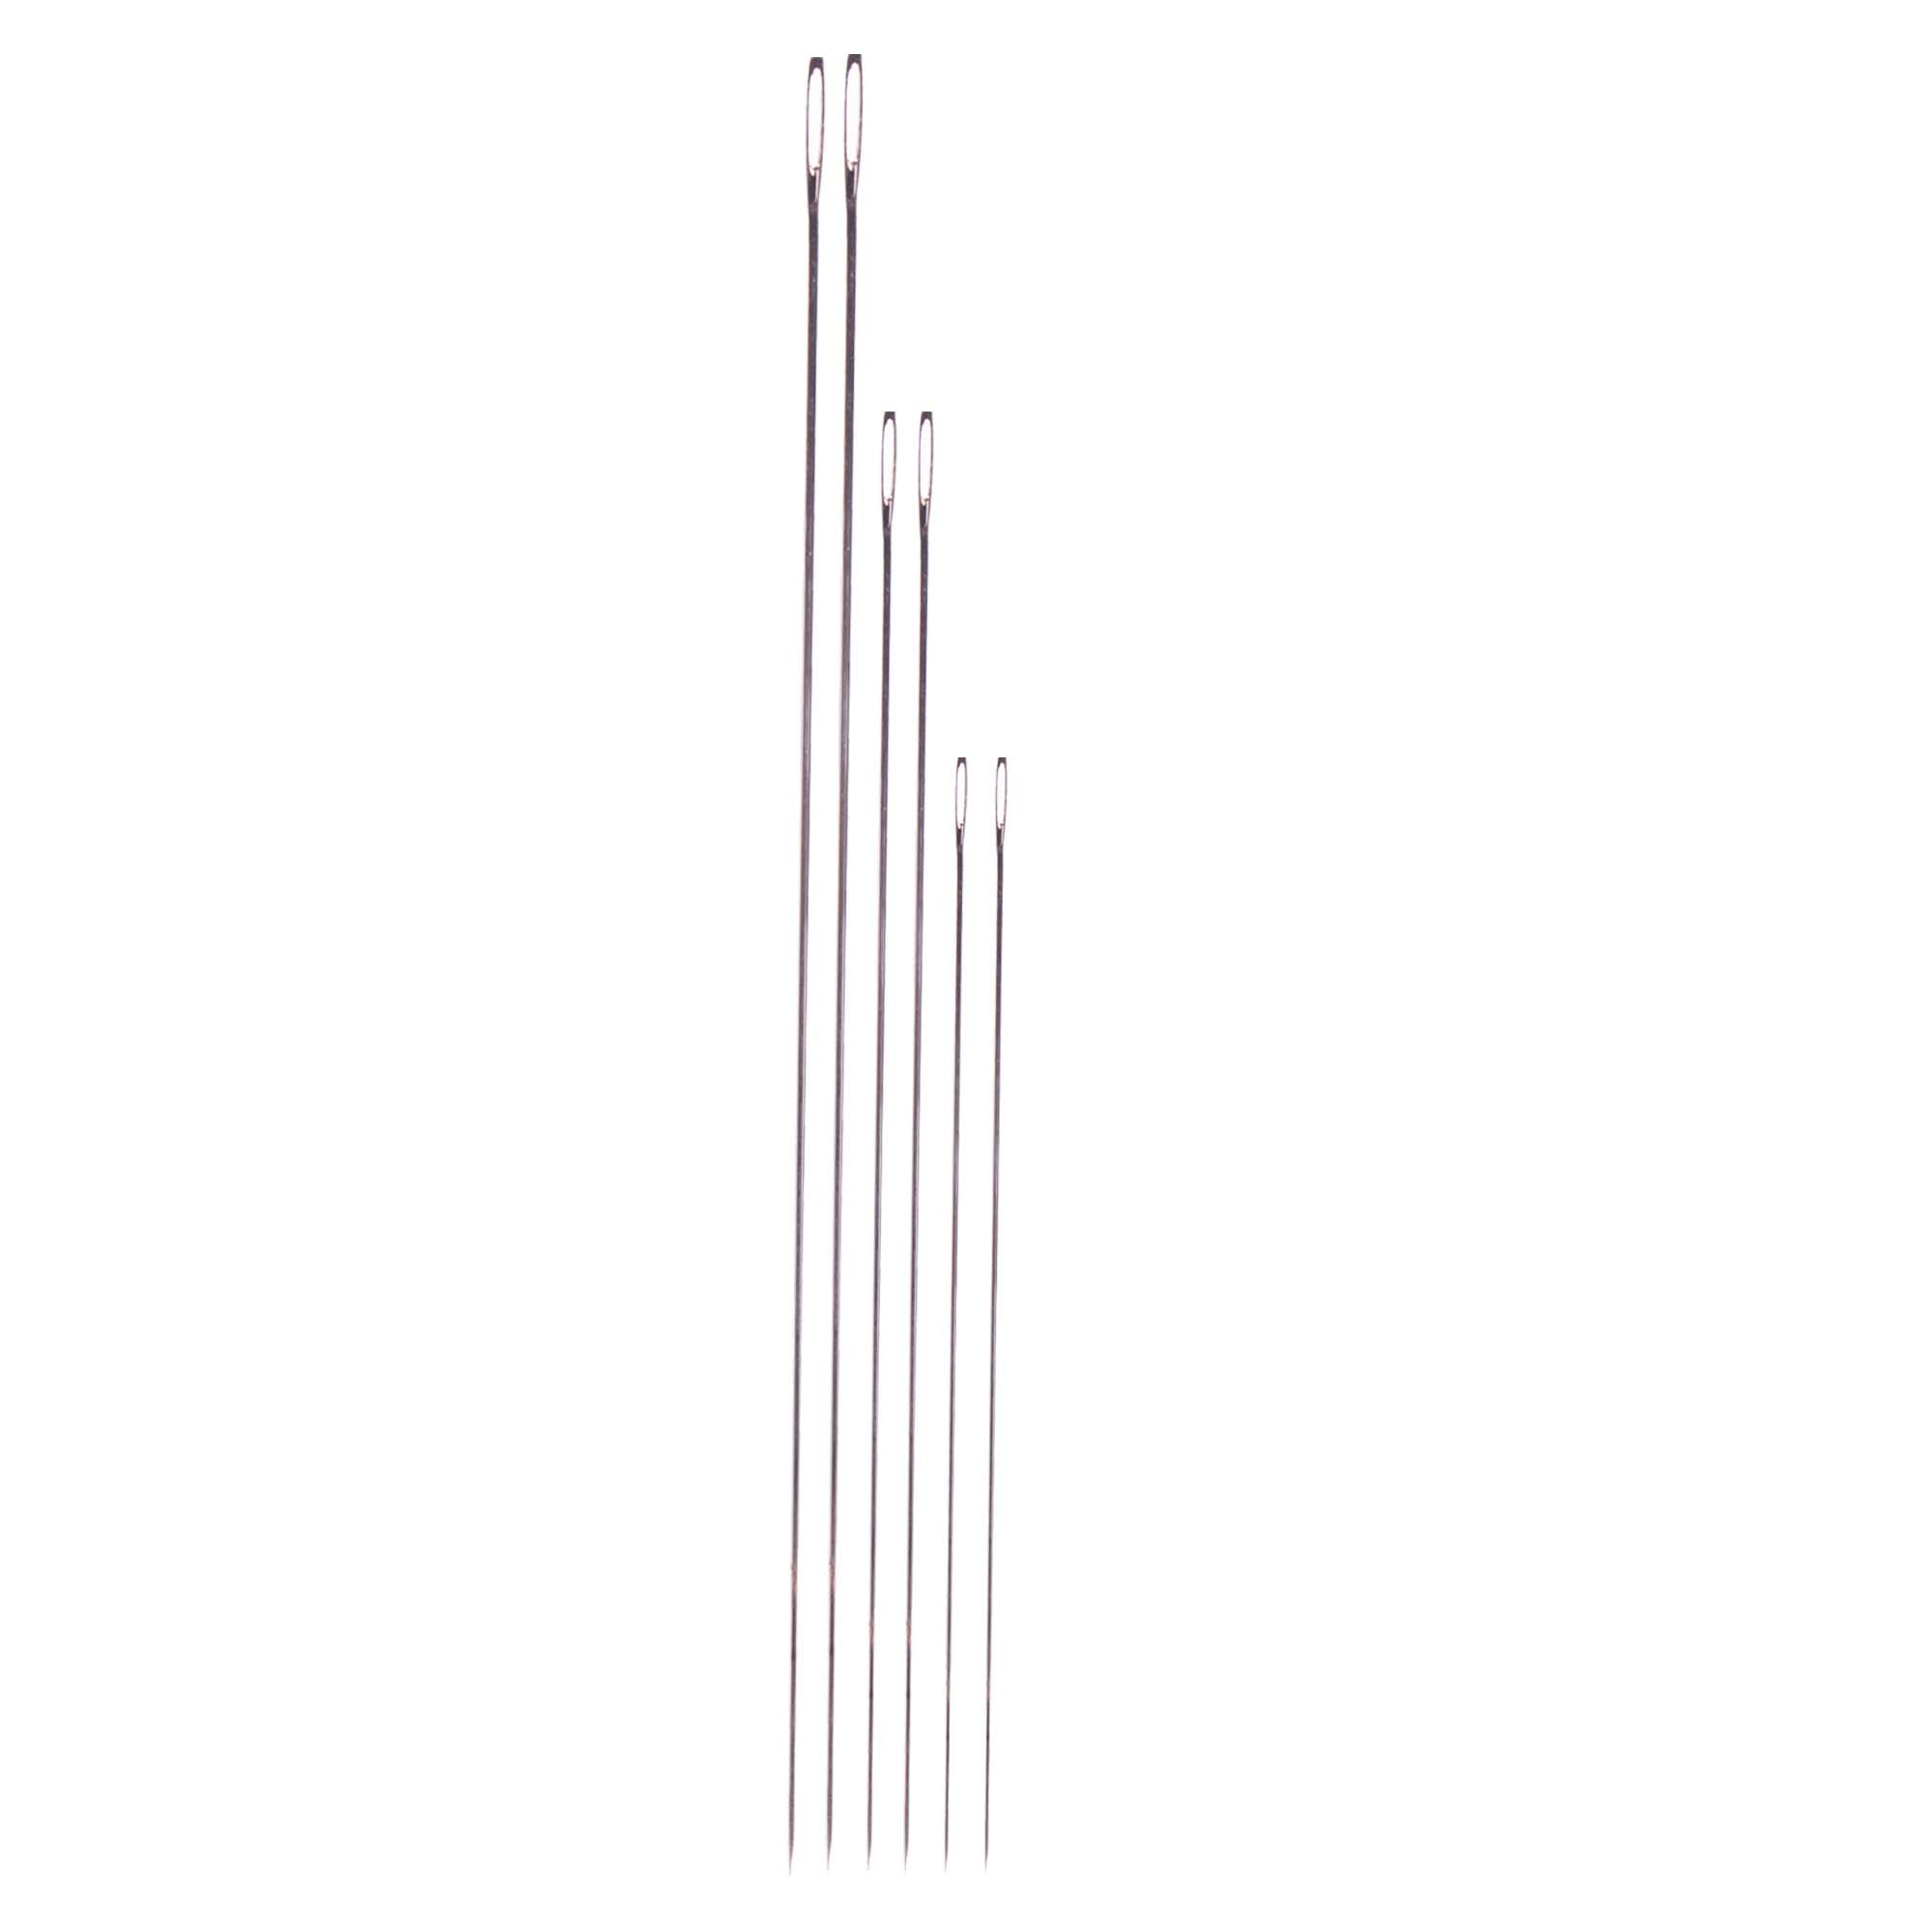 Flowering Needle 6;9;12inches Each 2 pc